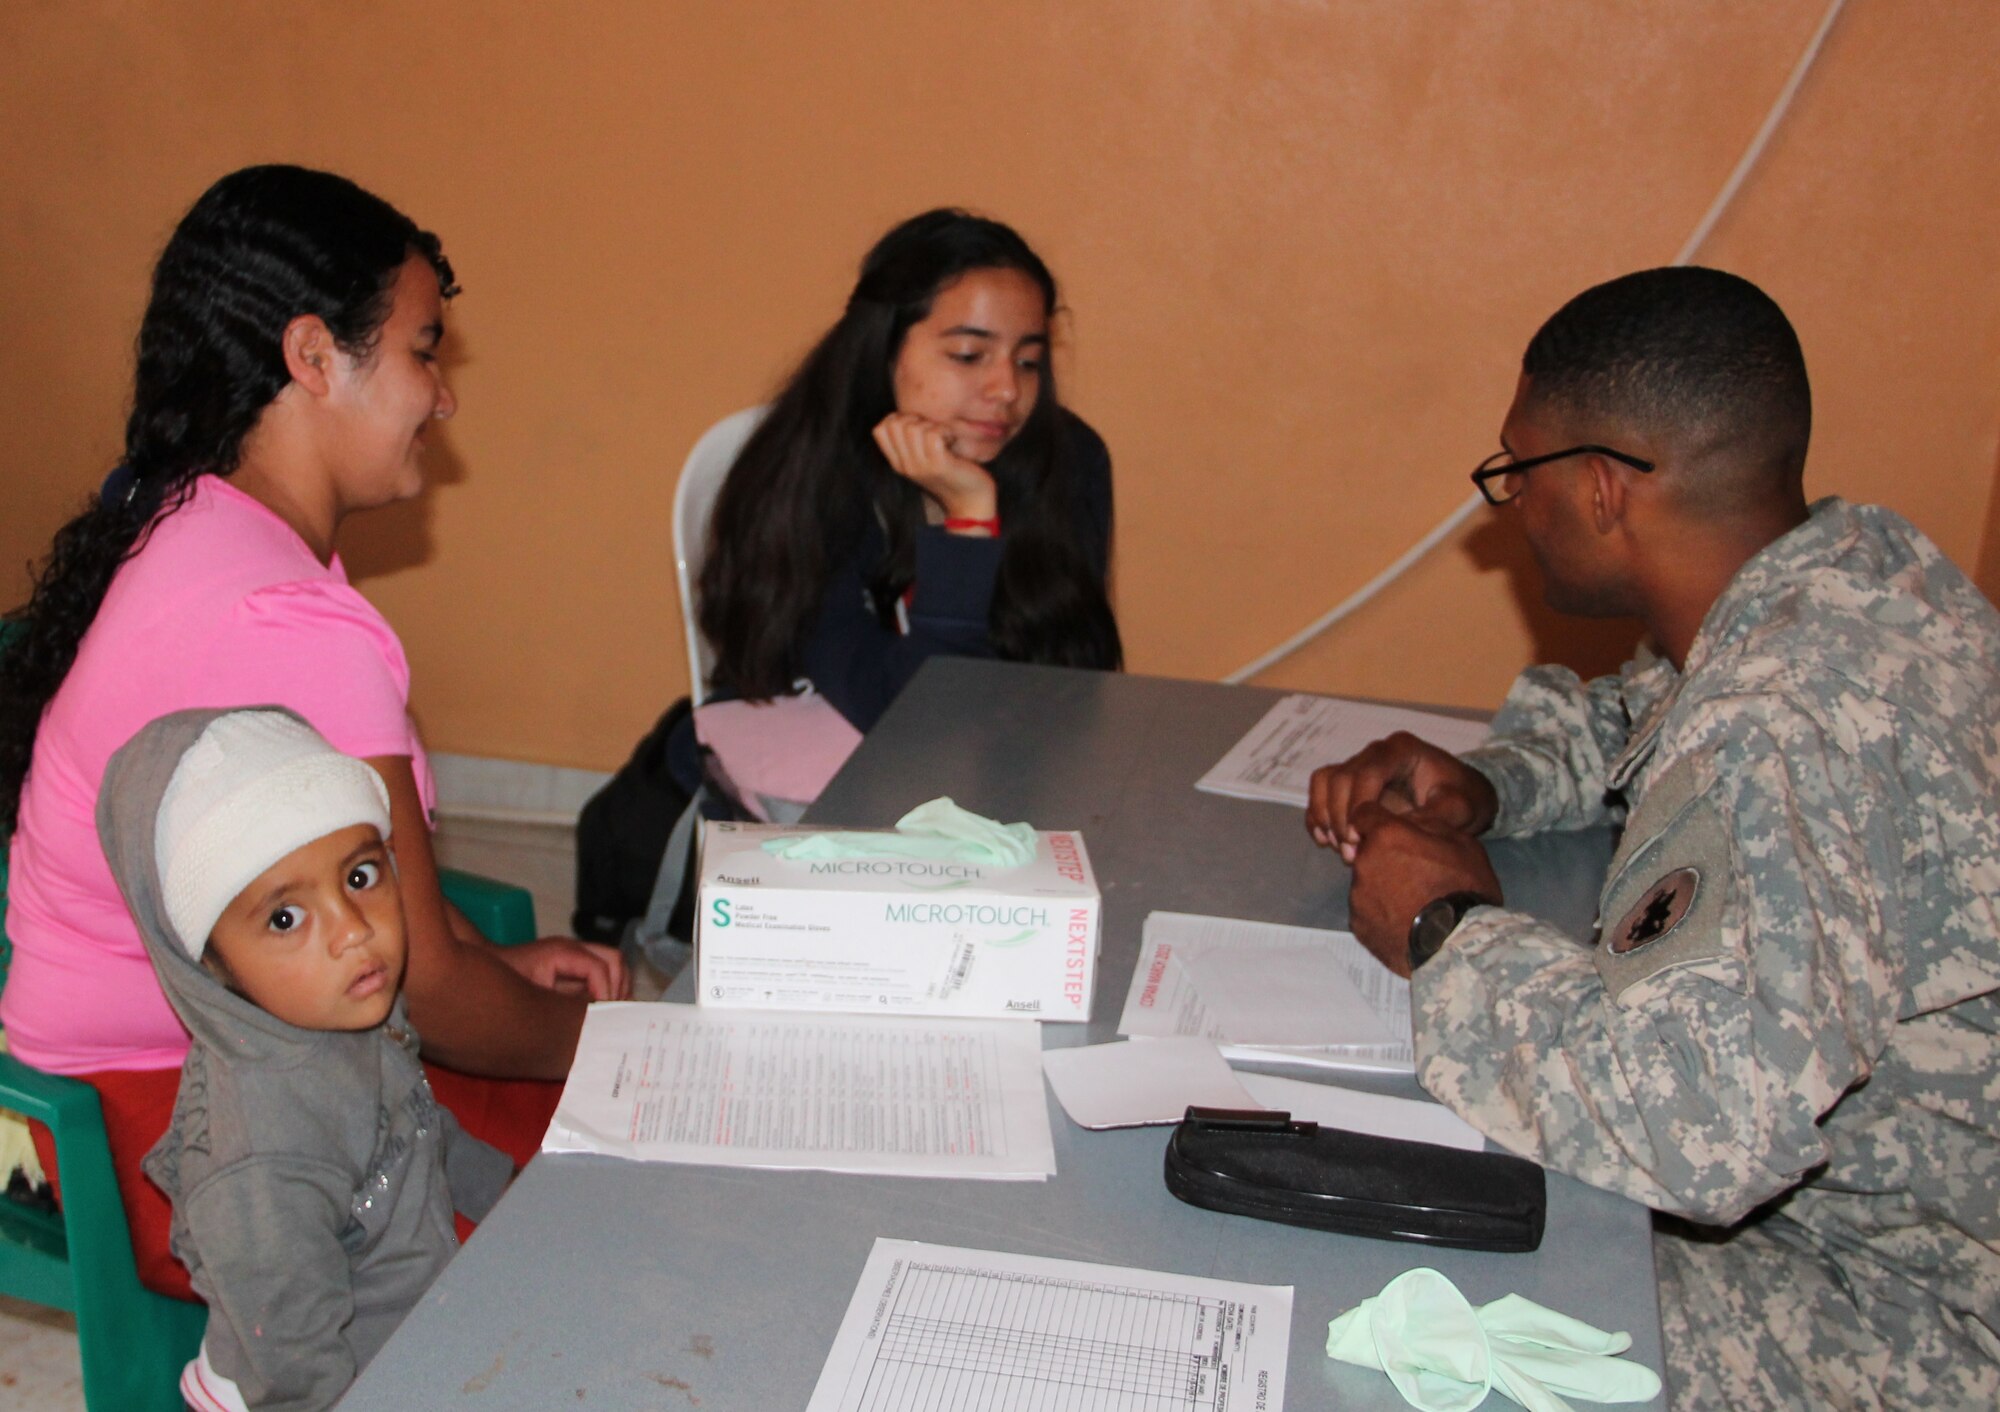 A woman and her child are prescreened by Joint Task Force-Bravo Medical Element technicians during a Medical Readiness Training Exercise, March 11-15, 2015. Joint Task Force-Bravo's Medical Element (MEDEL), with support from JTF-Bravo’s Joint Security Forces and Army Forces Battalion, partnered with the Honduran Ministry of Health and the Honduran military to provide medical care to 5,352 people and performed 11 surgeries over three days in the Department of Copan and Lempira, Honduras during a Mobile Surgical Team (MST), Medical Readiness Training Exercise (MEDRETE), and a Medical Partnership Exercise (MPE). (Photo by U.S. Army Sgt. Stephanie Tucker)